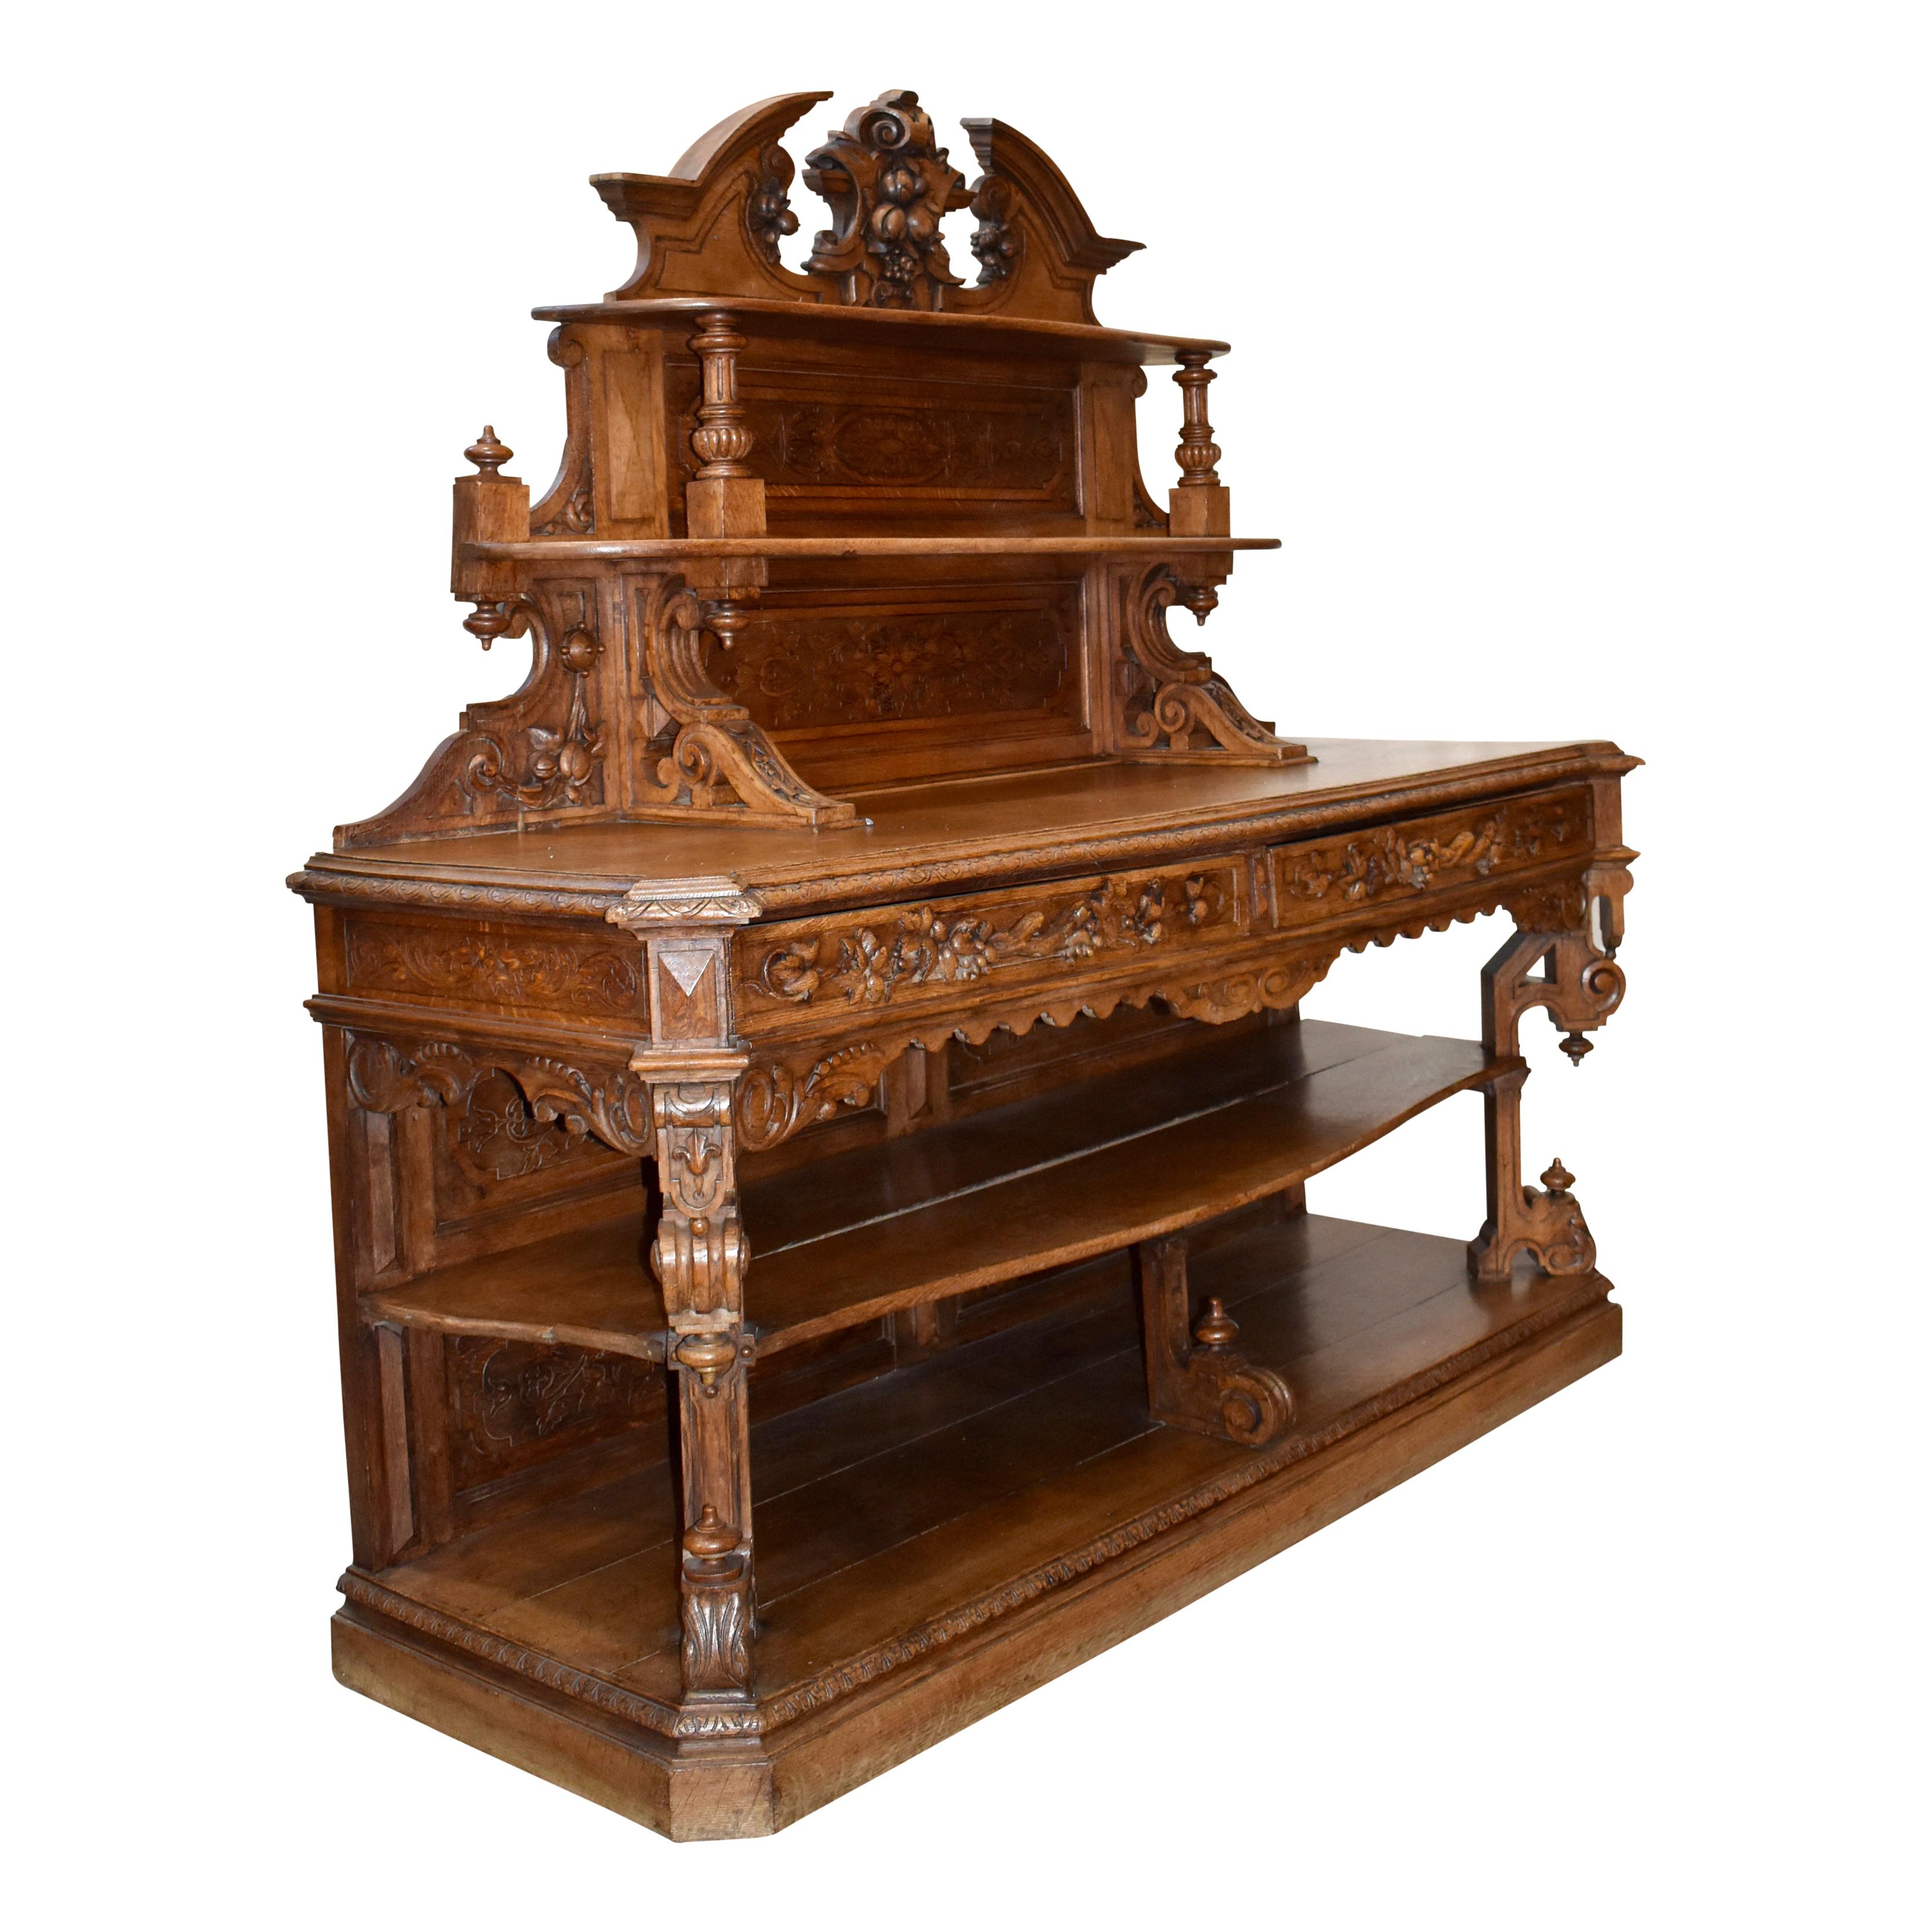 A luxurious piece with extensive carving, this seven foot oak sideboard from France features an open design with three serpentine shelves. A broken pediment with a central carving of fruit nestled in leaves crowns the top over two upper shelves. The